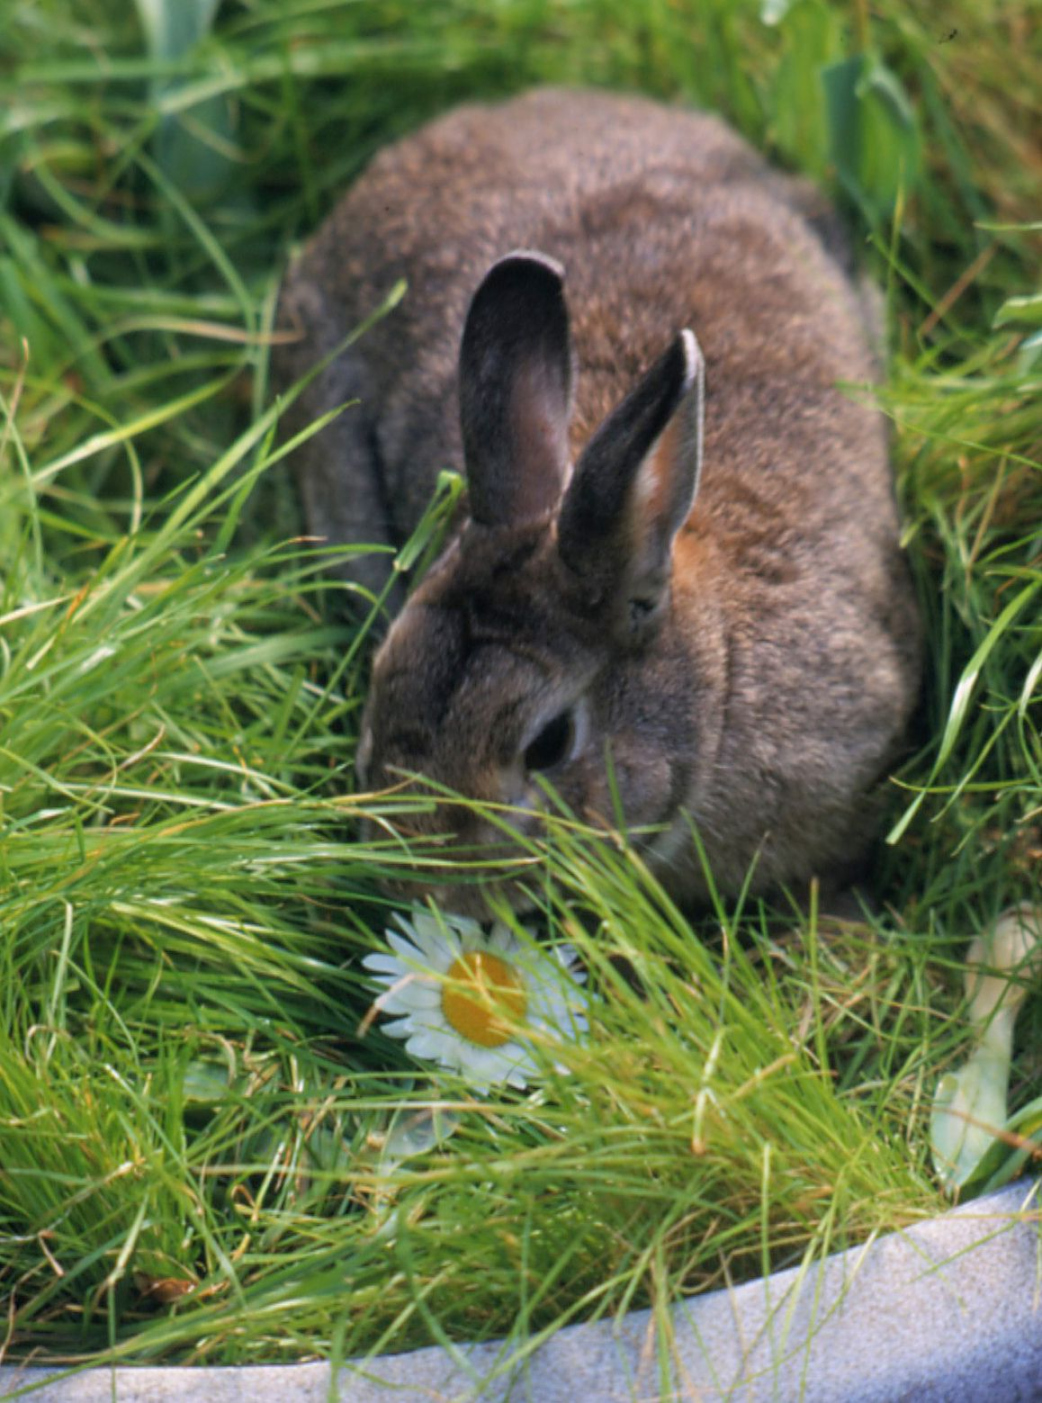 How to Stop Rabbits from Eating Plants in Your Garden